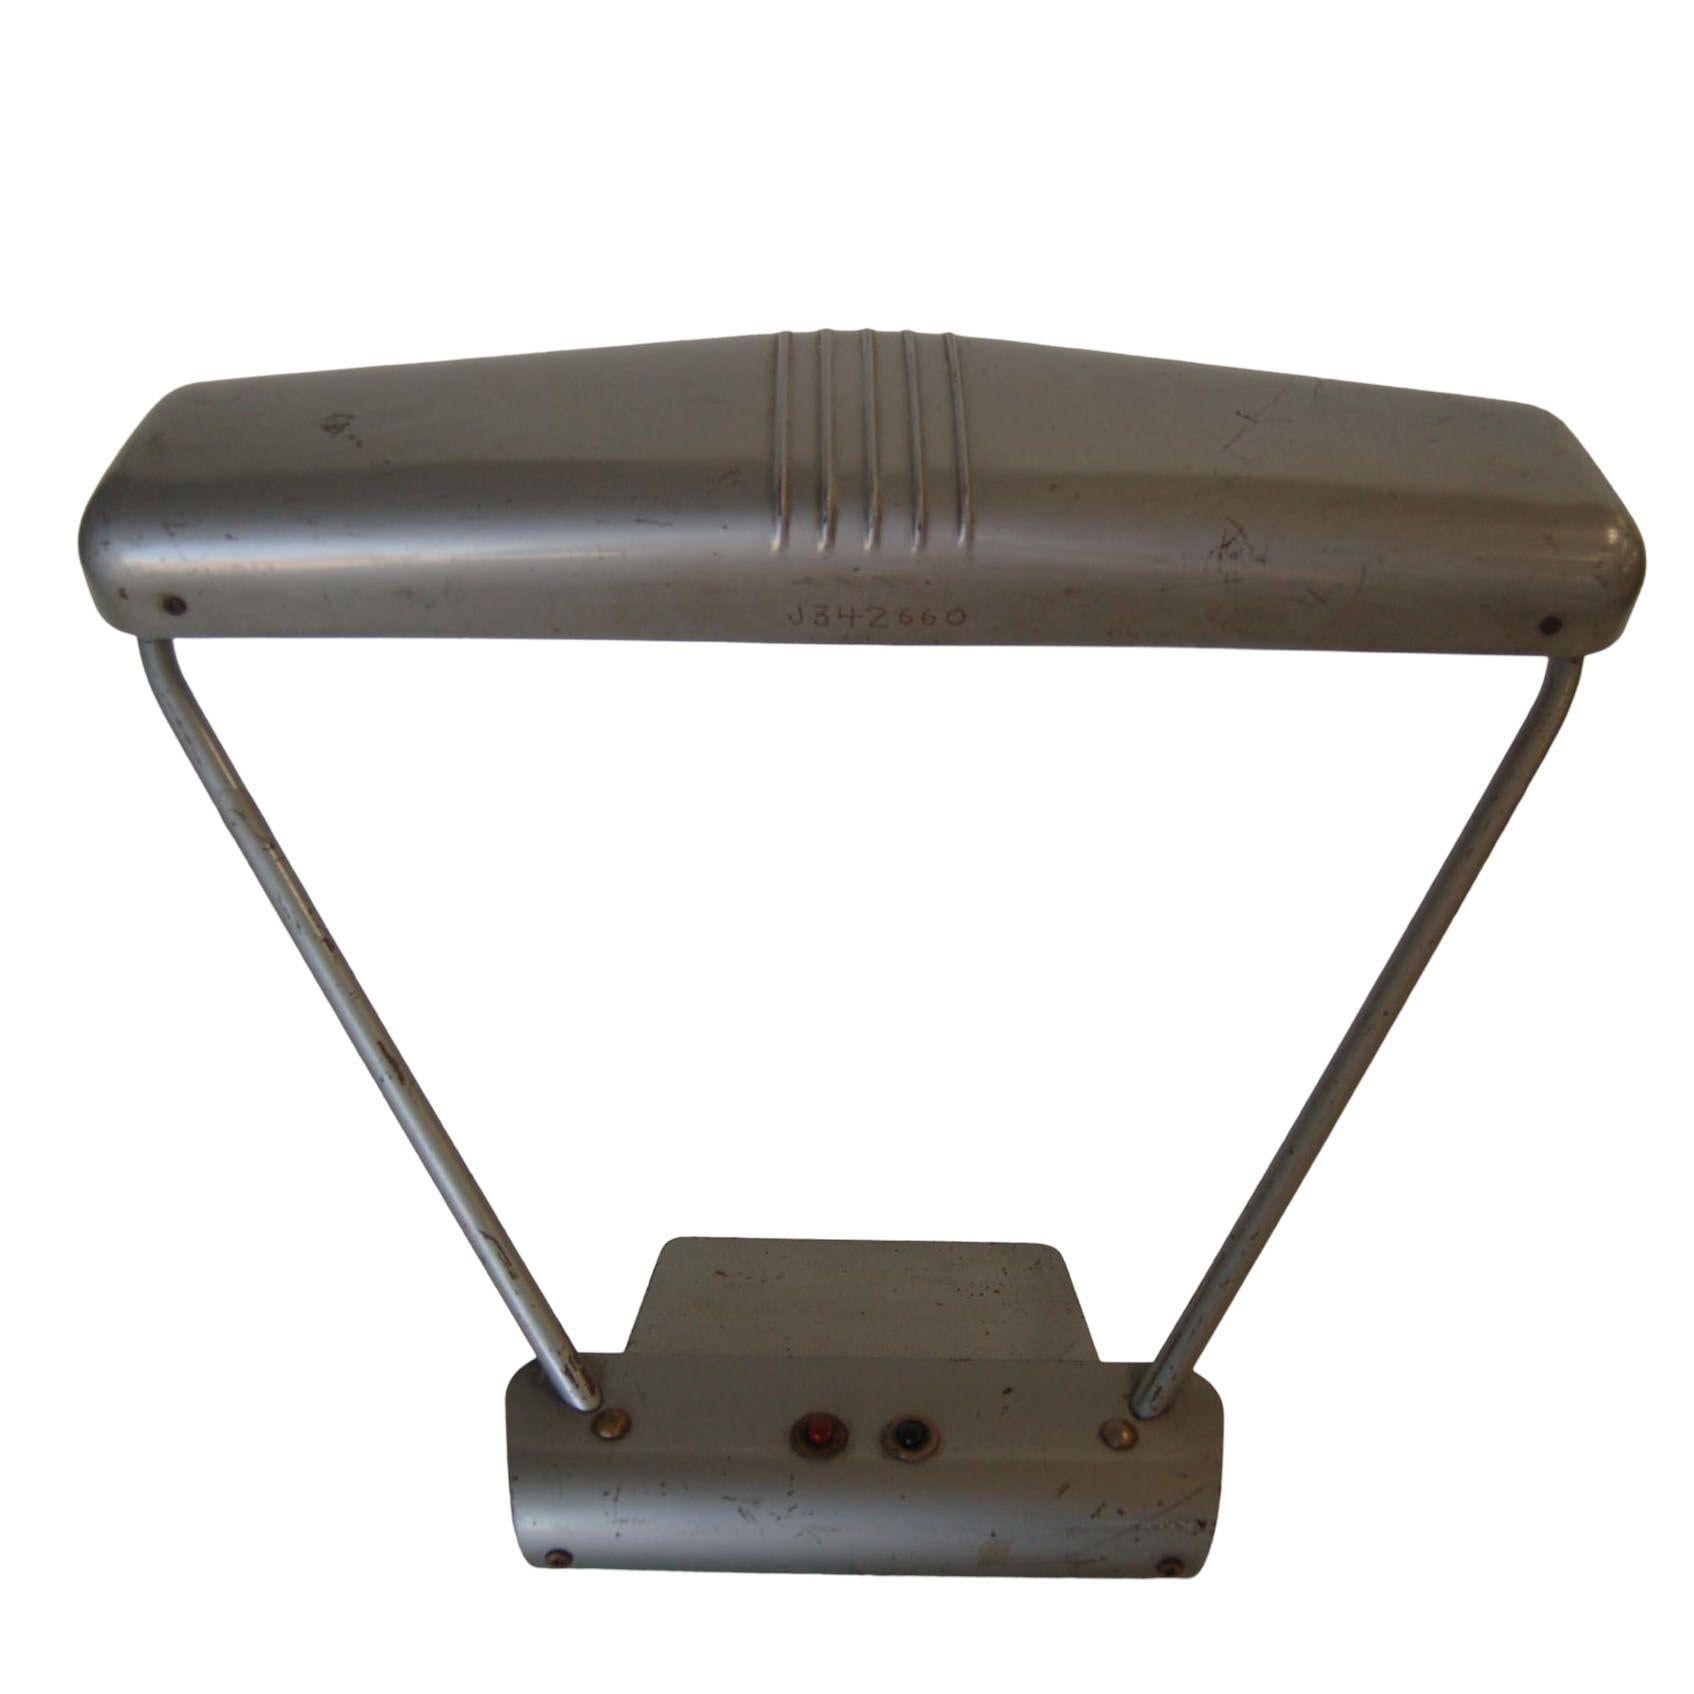 1950s gunmetal grey fluorescent machine age tanker desk lamp with lots of character, perfect on a vintage desk. Push-button on and off switch. Measures: 20